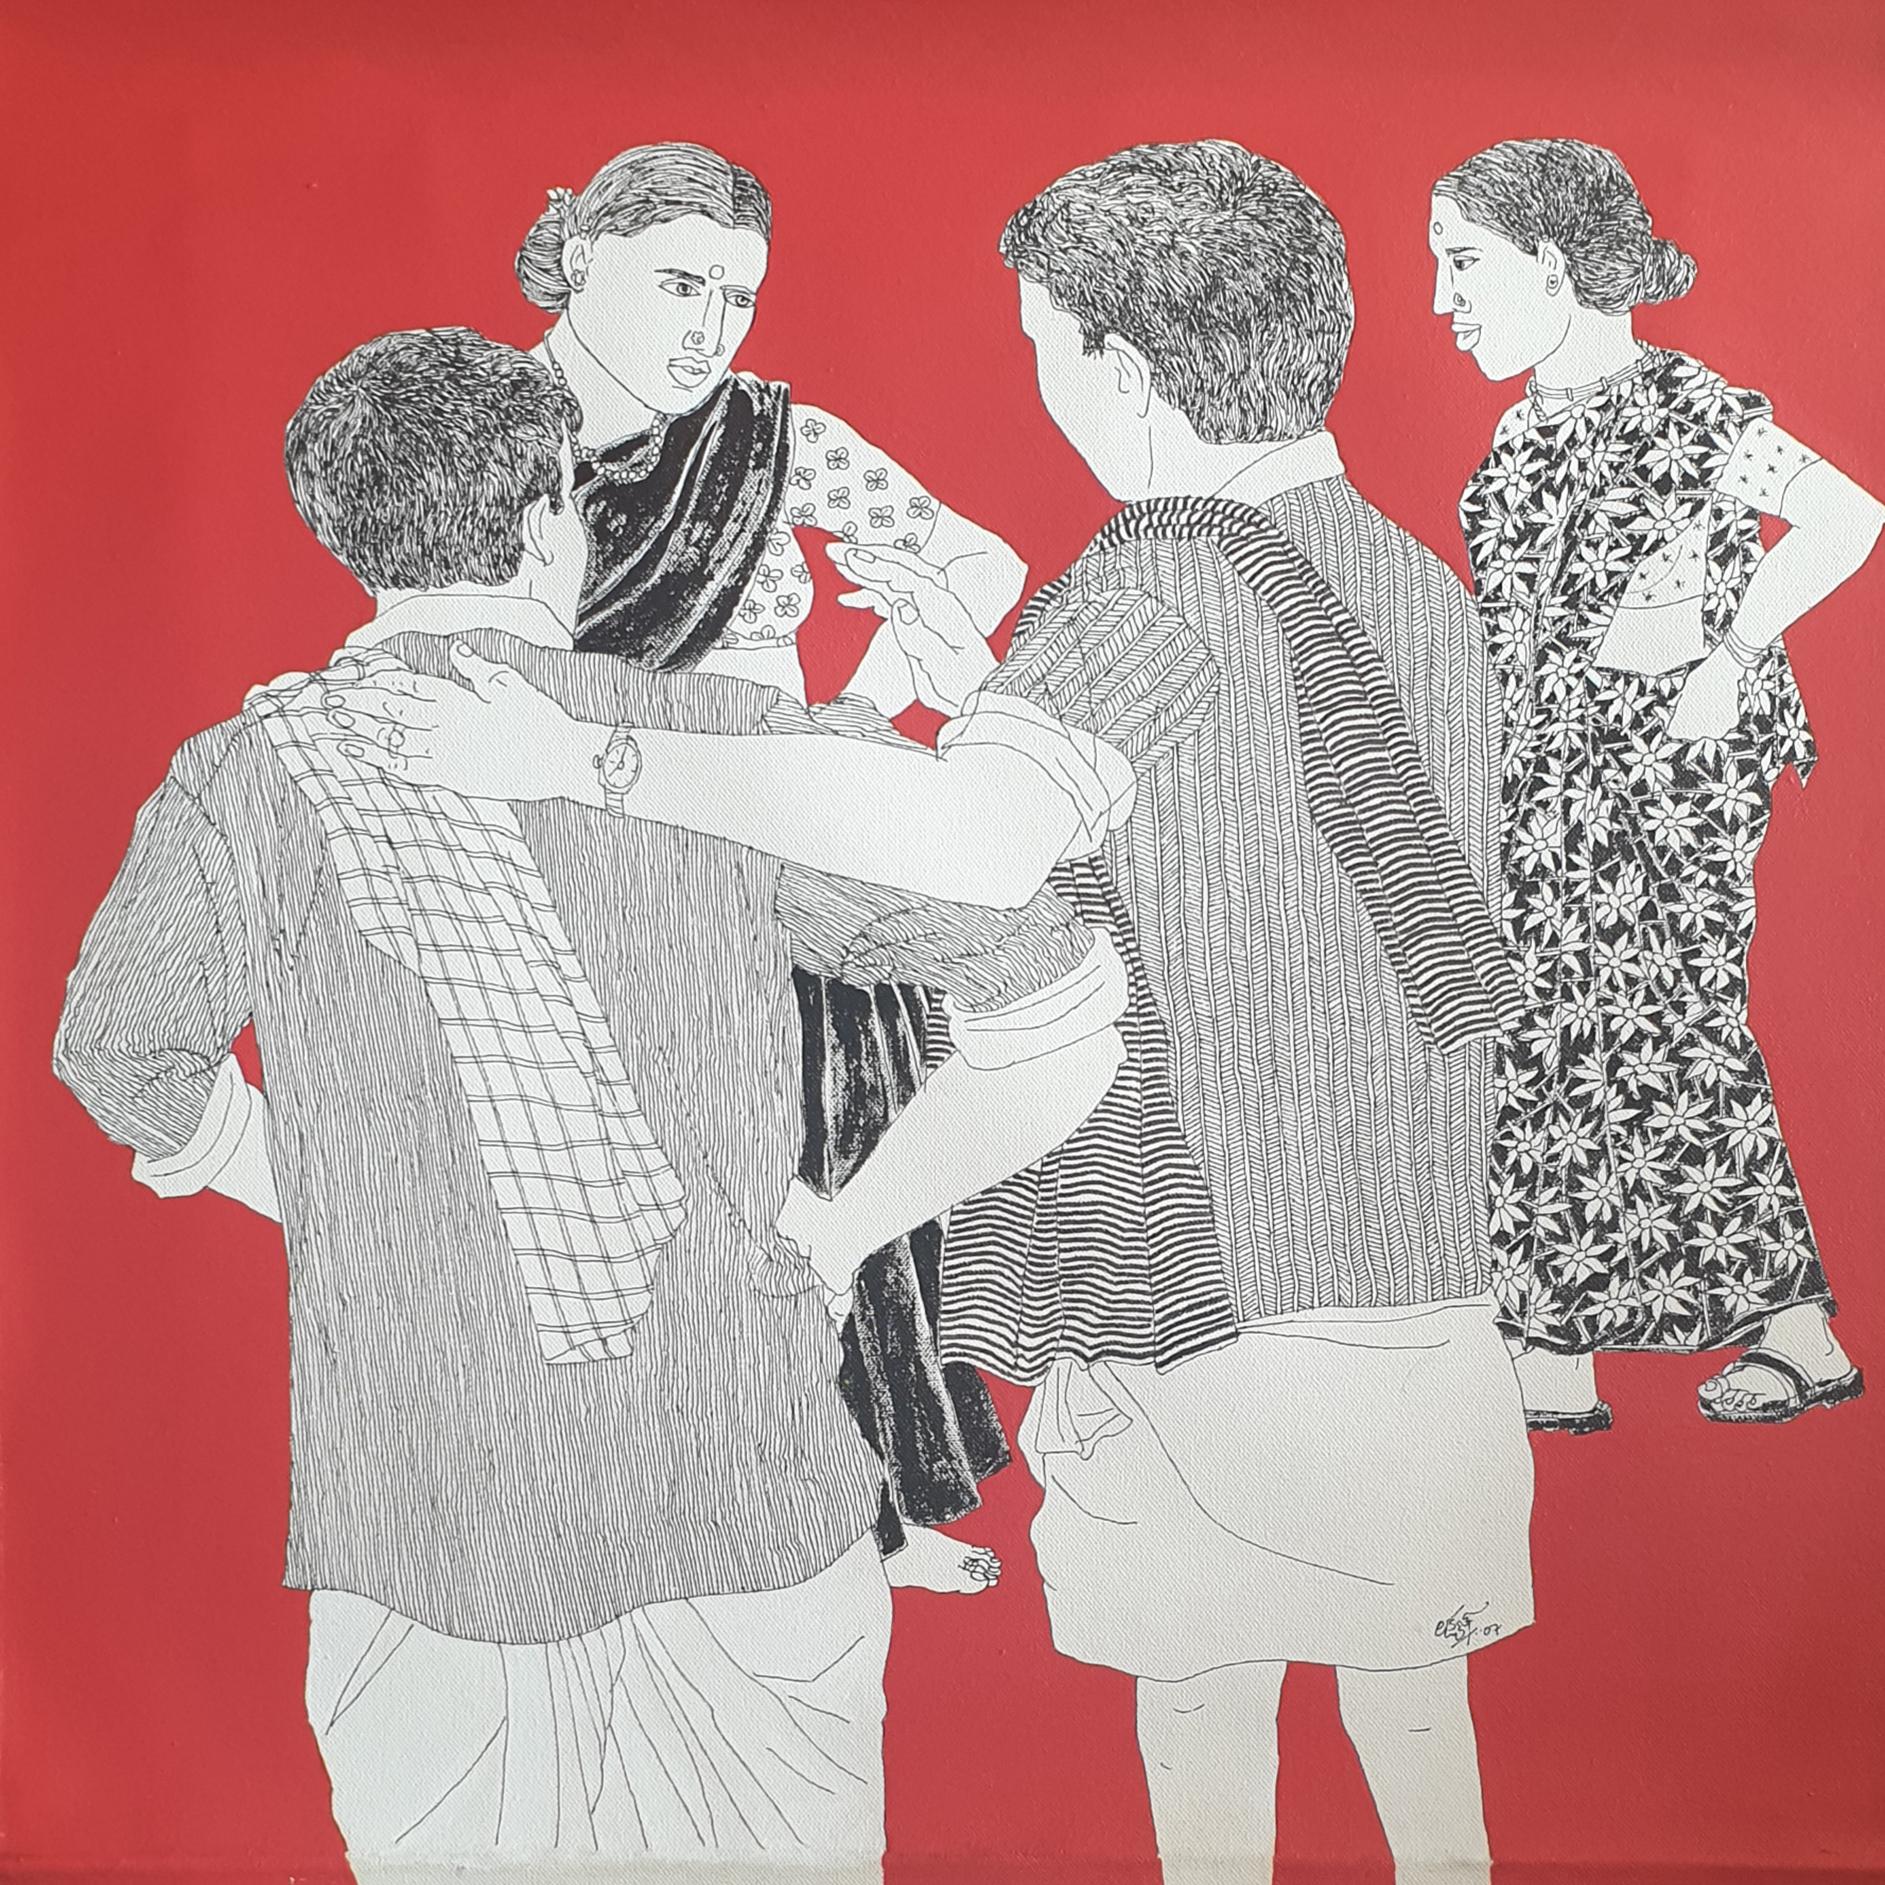 Laxman Aeley Figurative Painting - Telengana Men & Women, Gossip, Acrylic on Canvas, Red by Indian Artist"In Stock"